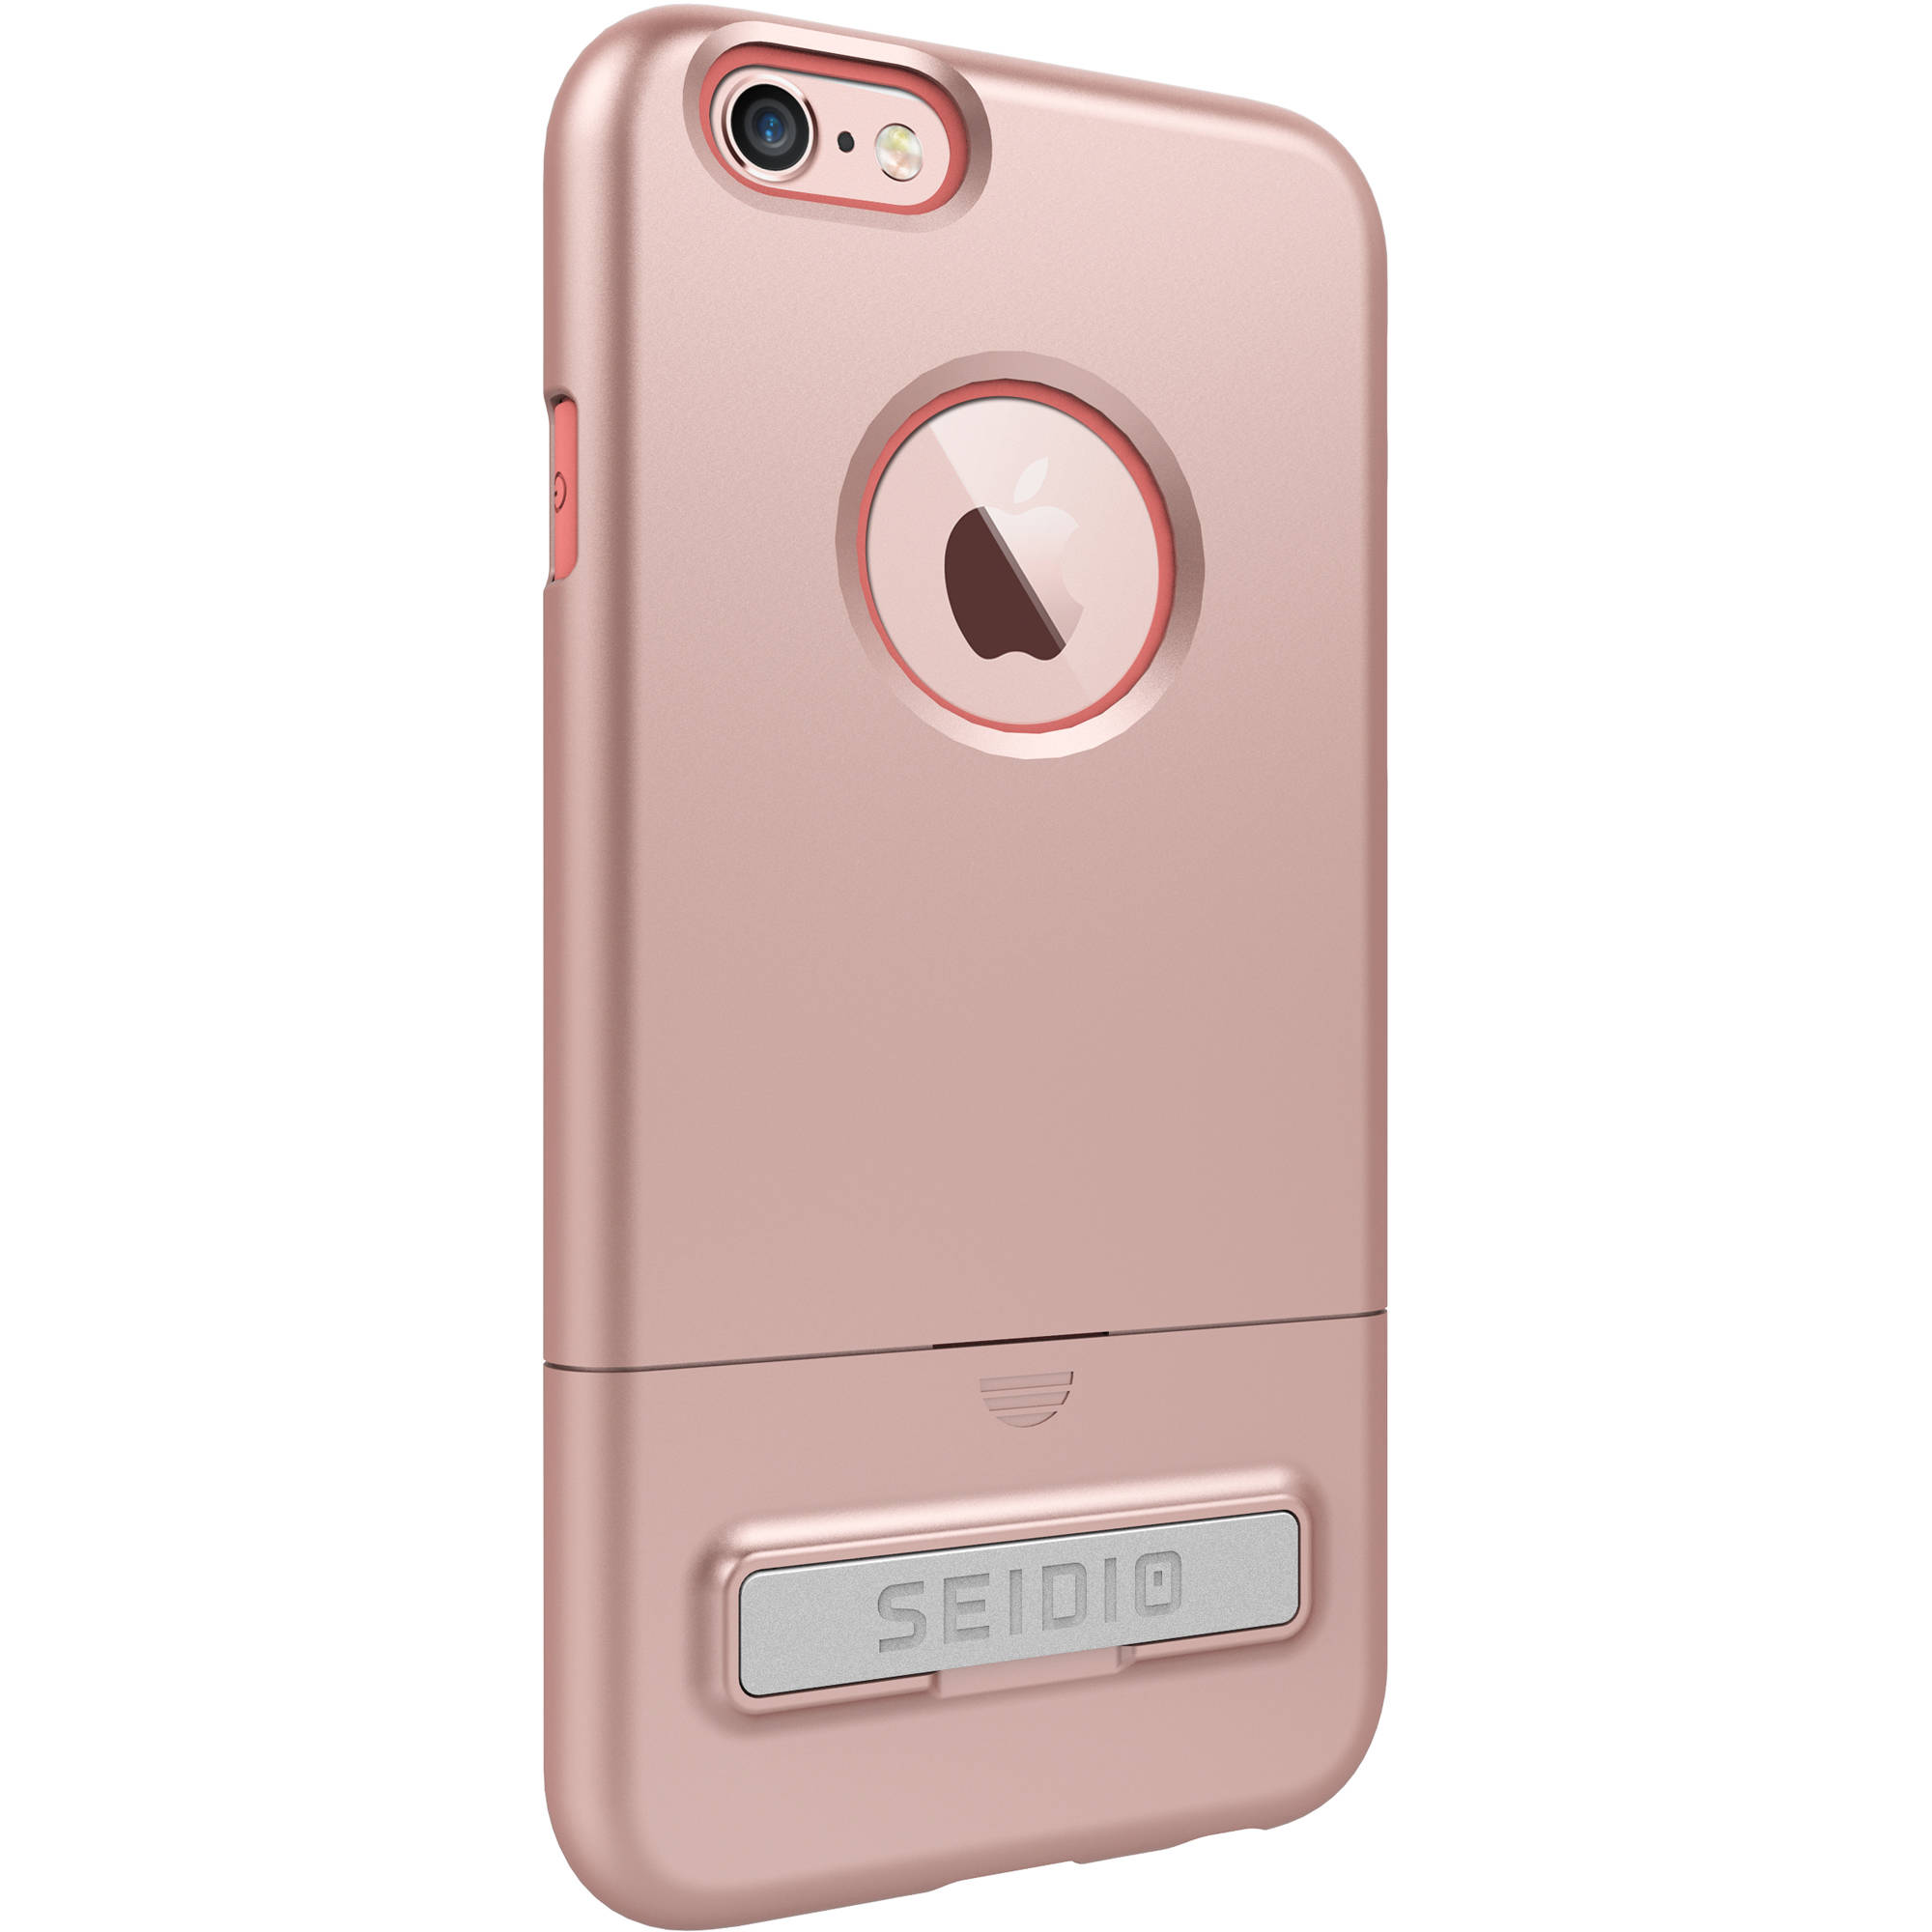 Seidio Surface Case With Kickstand For Iphone 6 6s Csr7iph6k Rgp